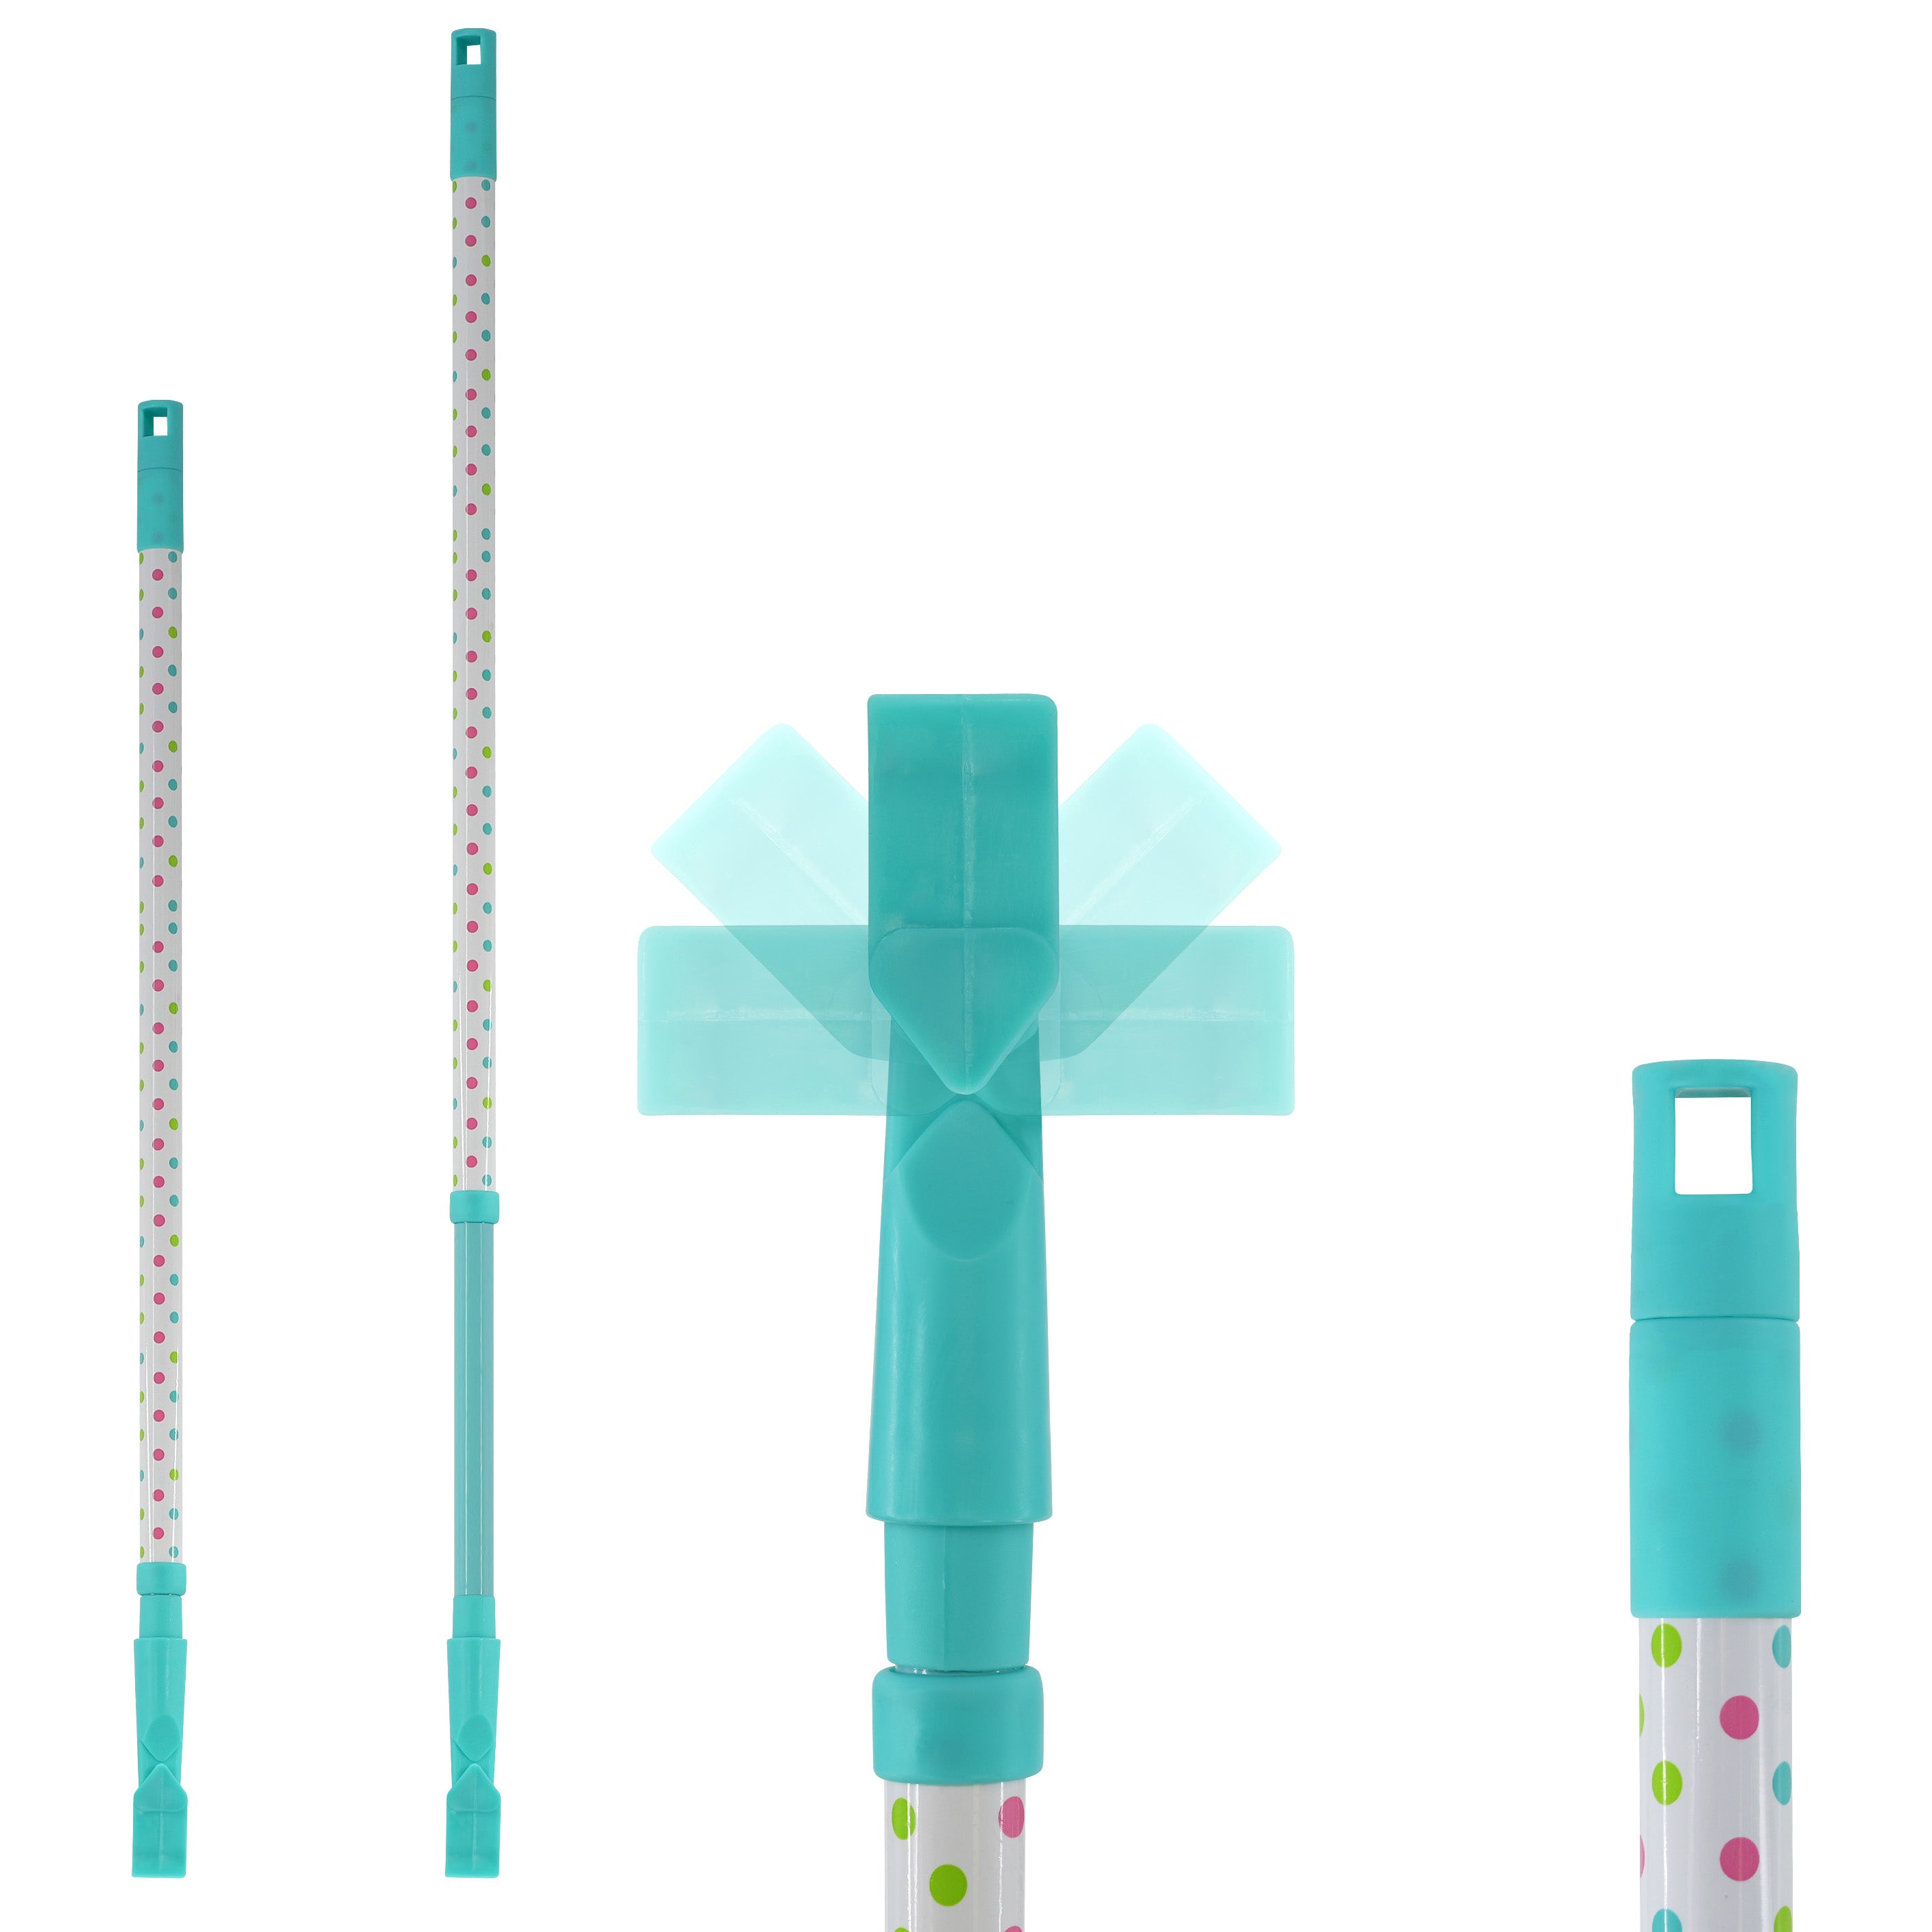 Double-Sided Microfibre Mop + 1 FREE Mop Pad Refill MTS - The Magic Toy Shop